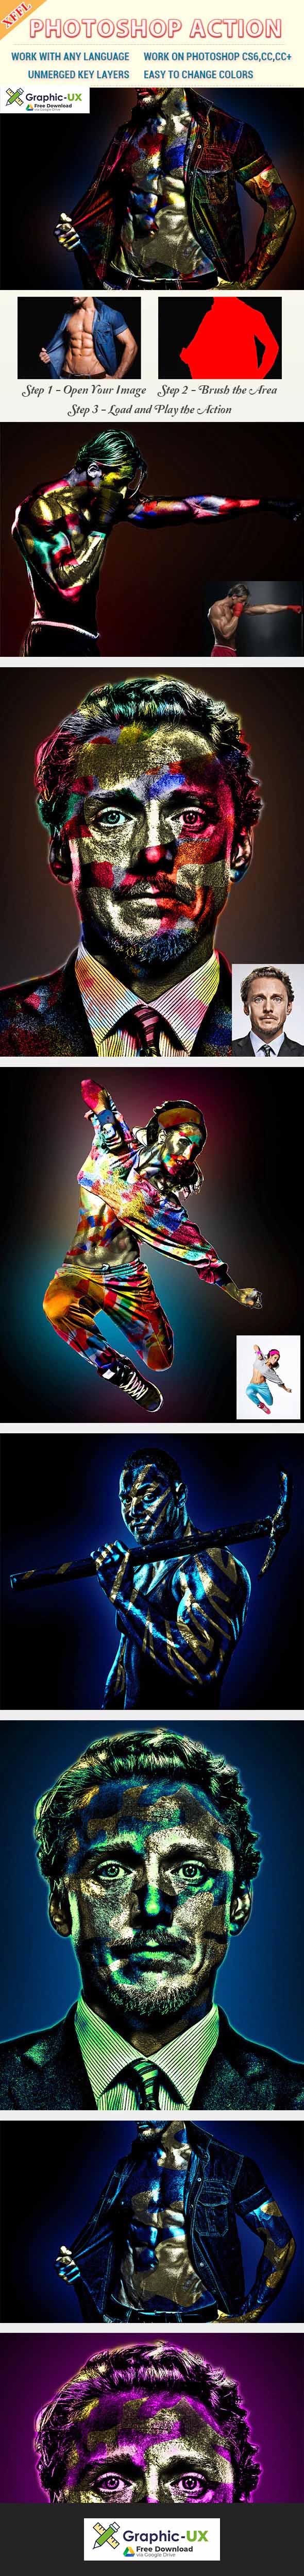 Golden Body Painting Photoshop Action 